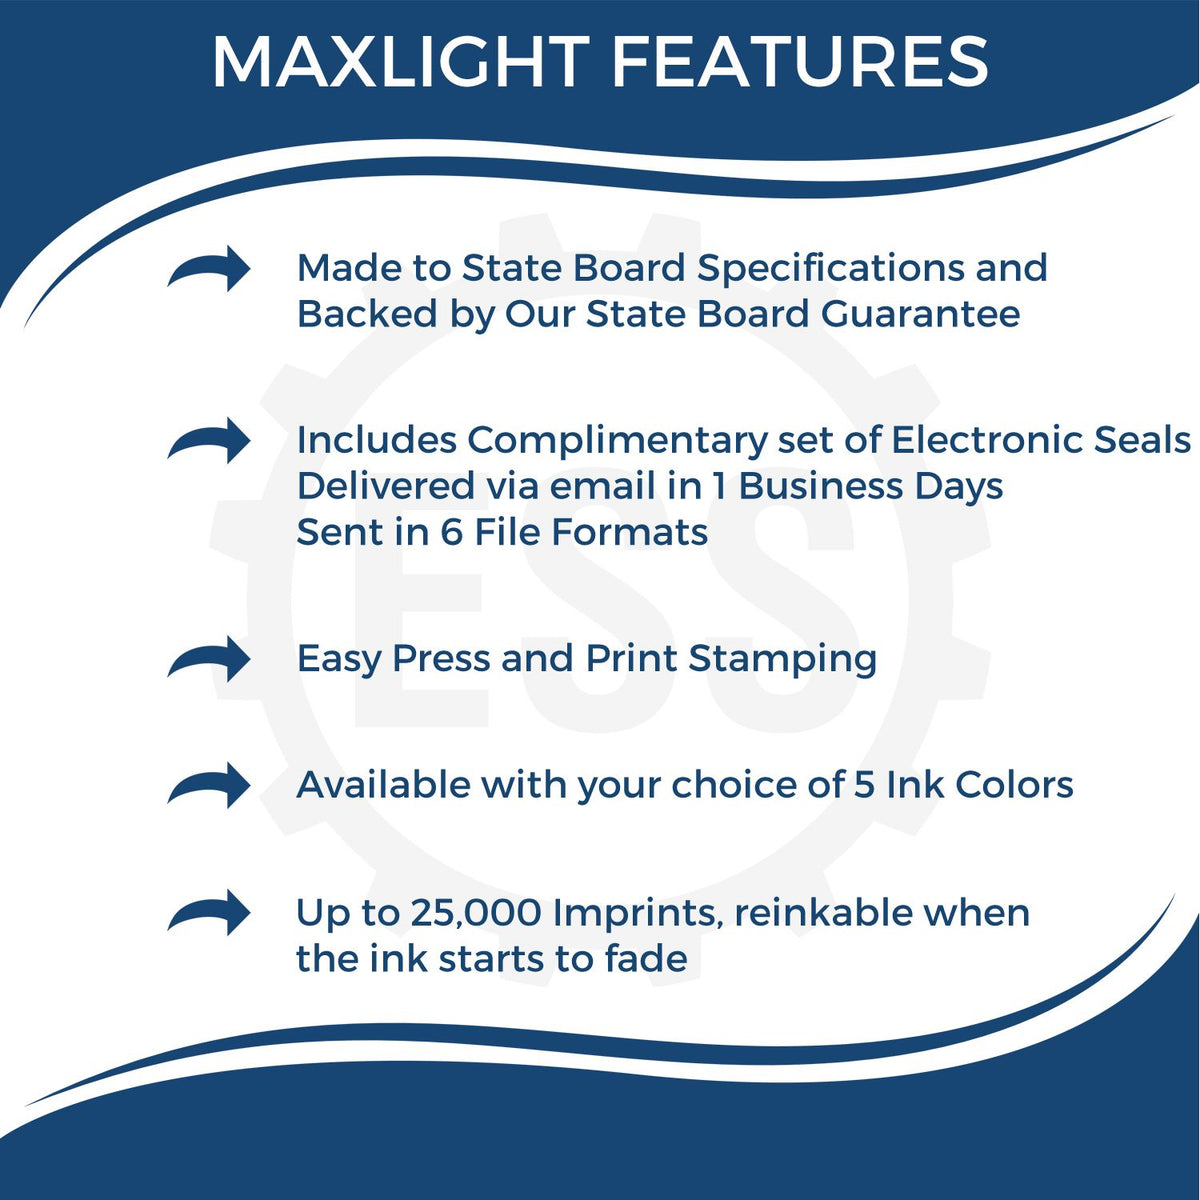 A picture of an infographic highlighting the selling points for the Premium MaxLight Pre-Inked Montana Engineering Stamp